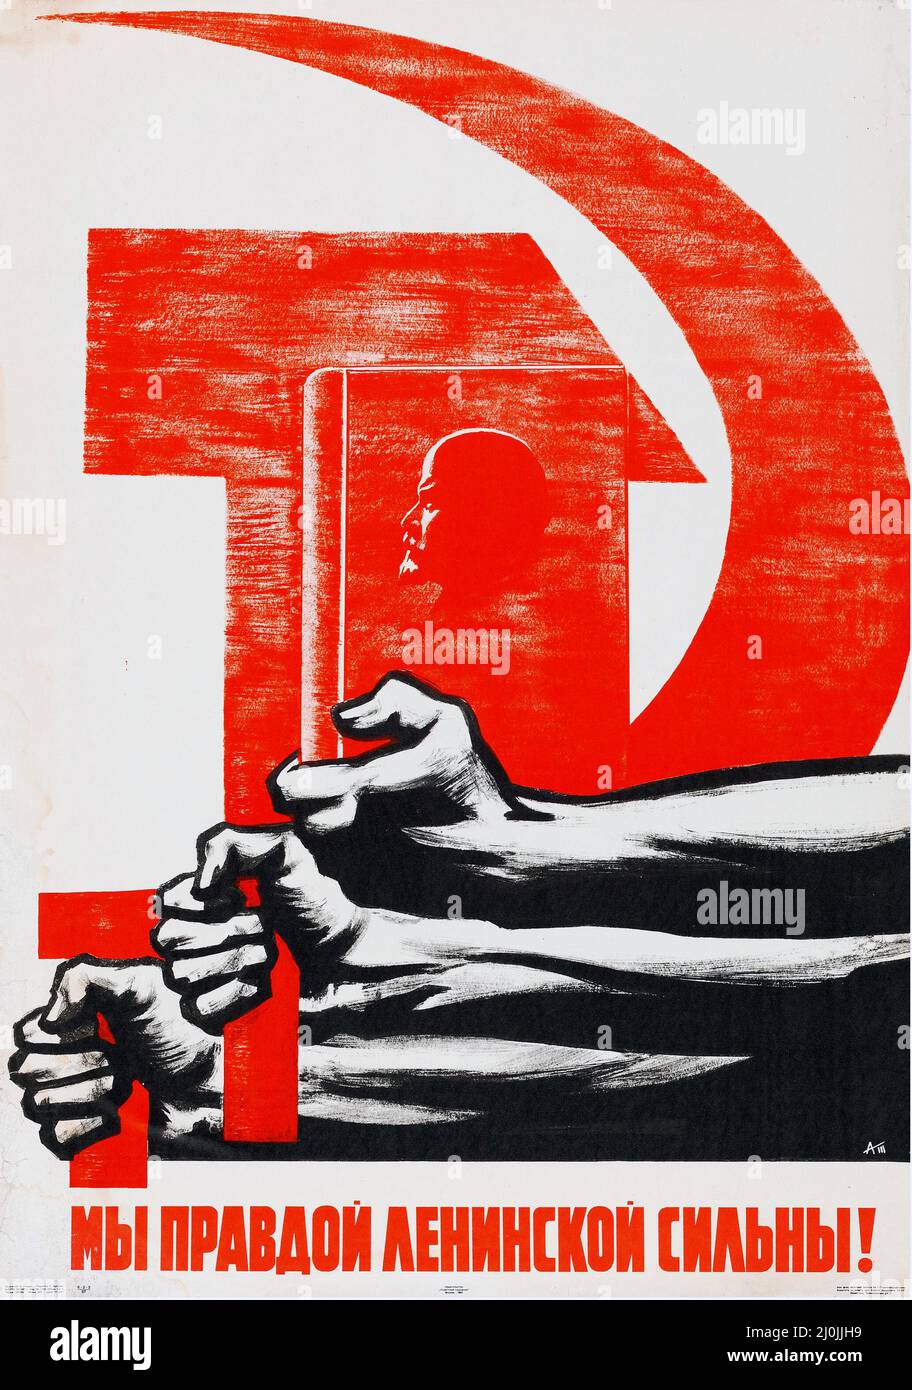 Soviet / Russian Propaganda (1967). Soviet Poster - 'The Truth of Lenin is Strong!' feat a hammer and sickle. Stock Photo